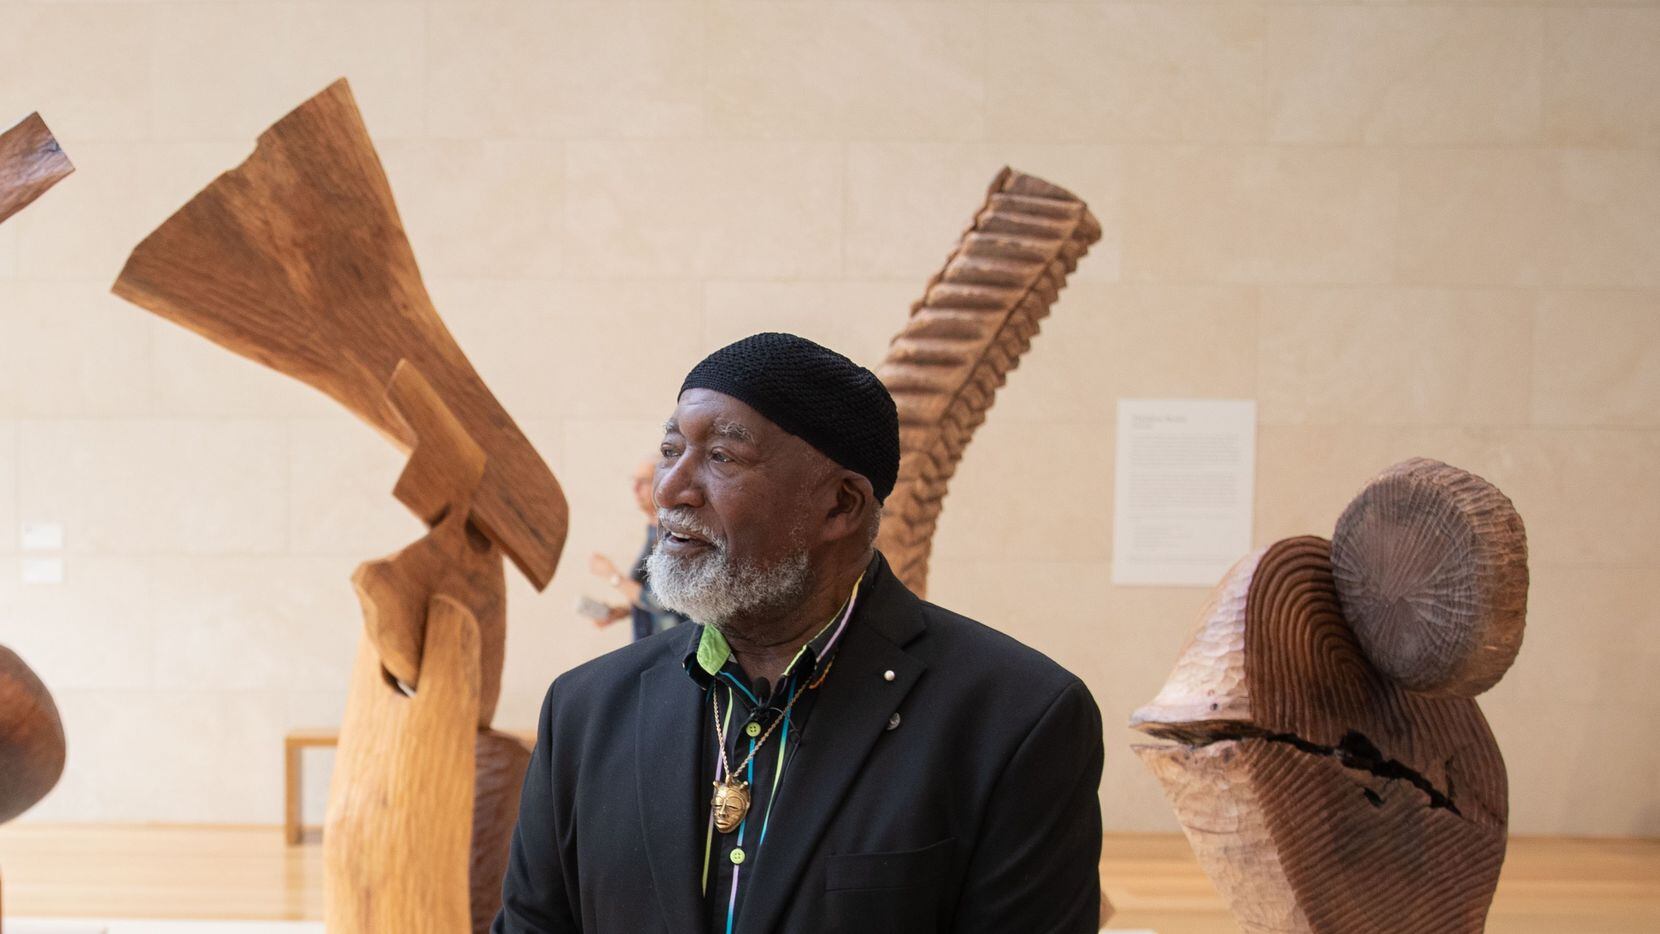 Artist Thaddeus Mosley at the Nasher Sculpture Center with his show, 'Thaddeus Mosley: Forest.'